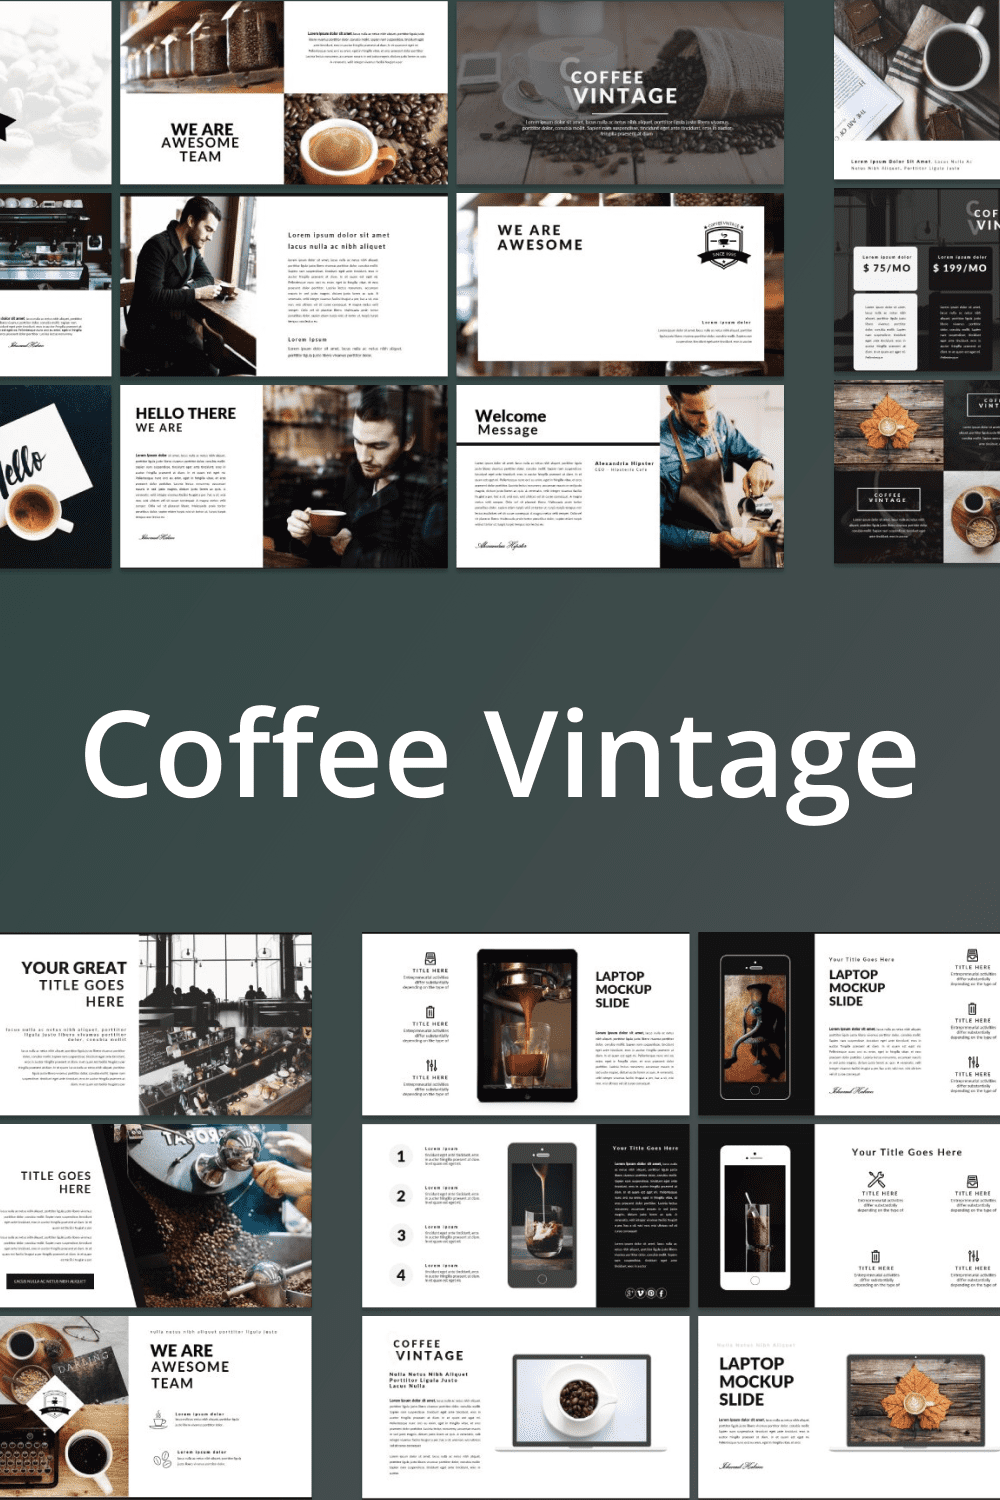 Presentation pages with coffee in a glass, coffee machines, baristas, and maps with a coffee beans.